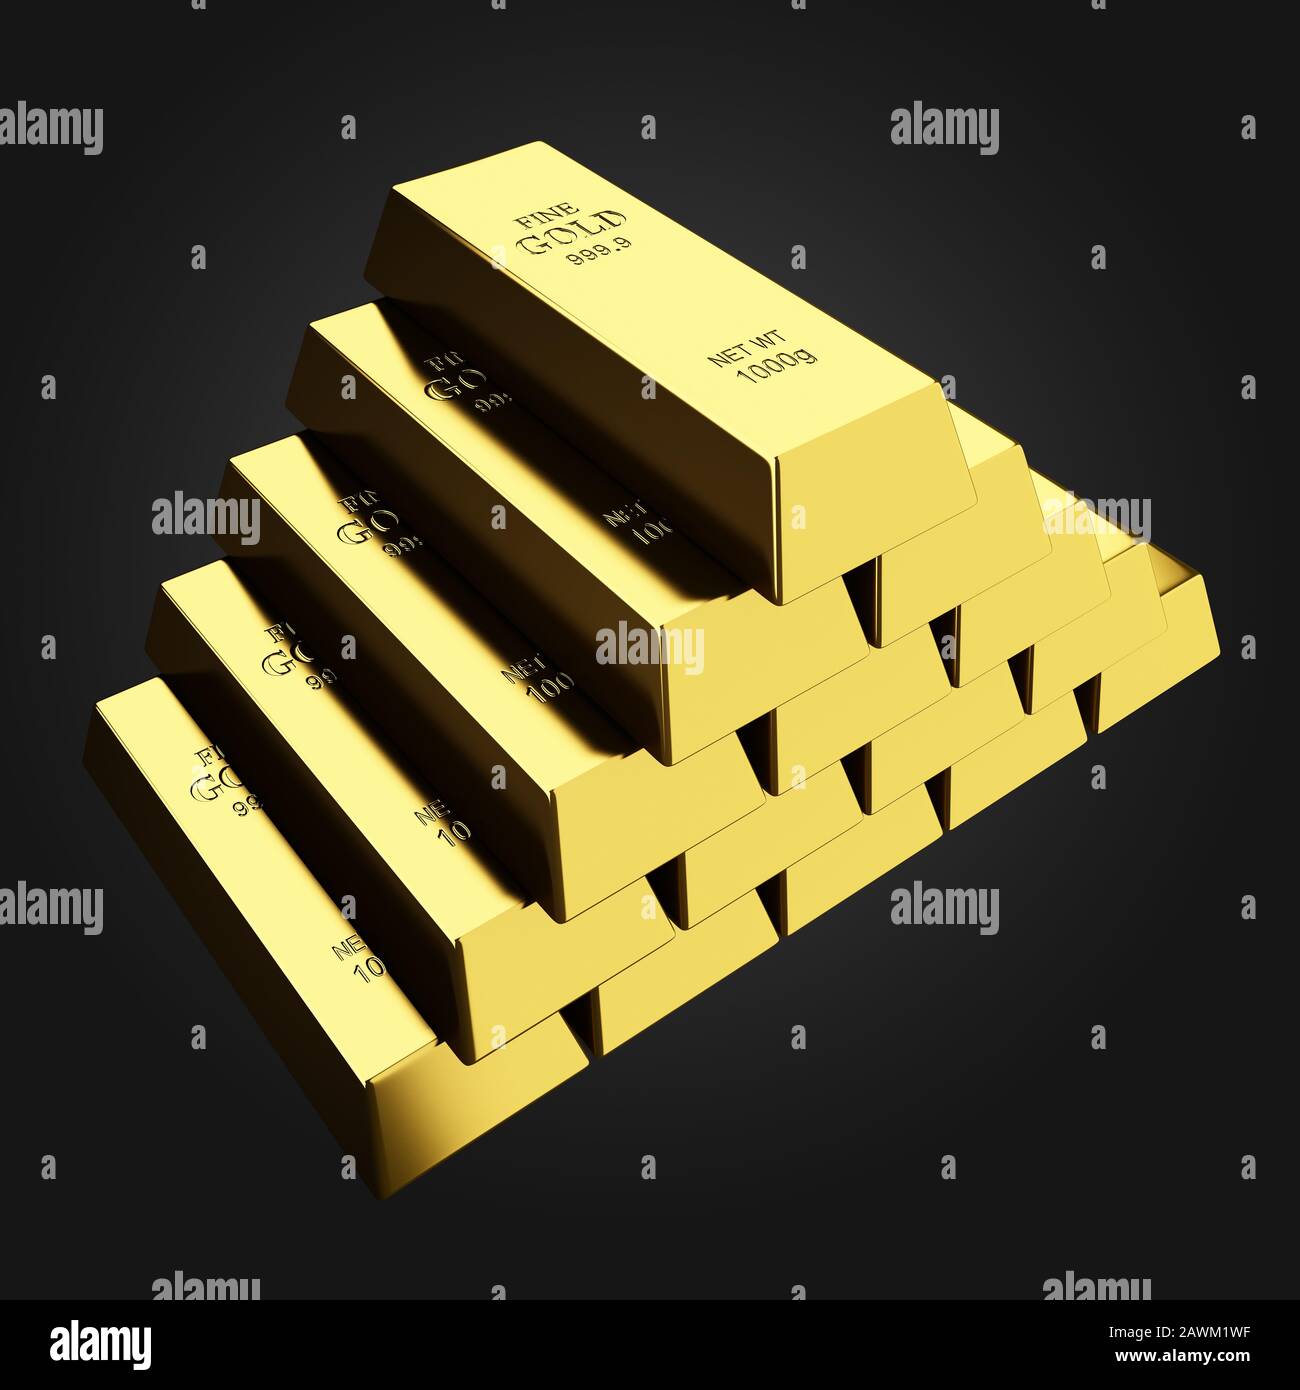 Stack of shiny gold bars isolateted on dark background. Financial and business background concept of wealth and riches. Stock Photo